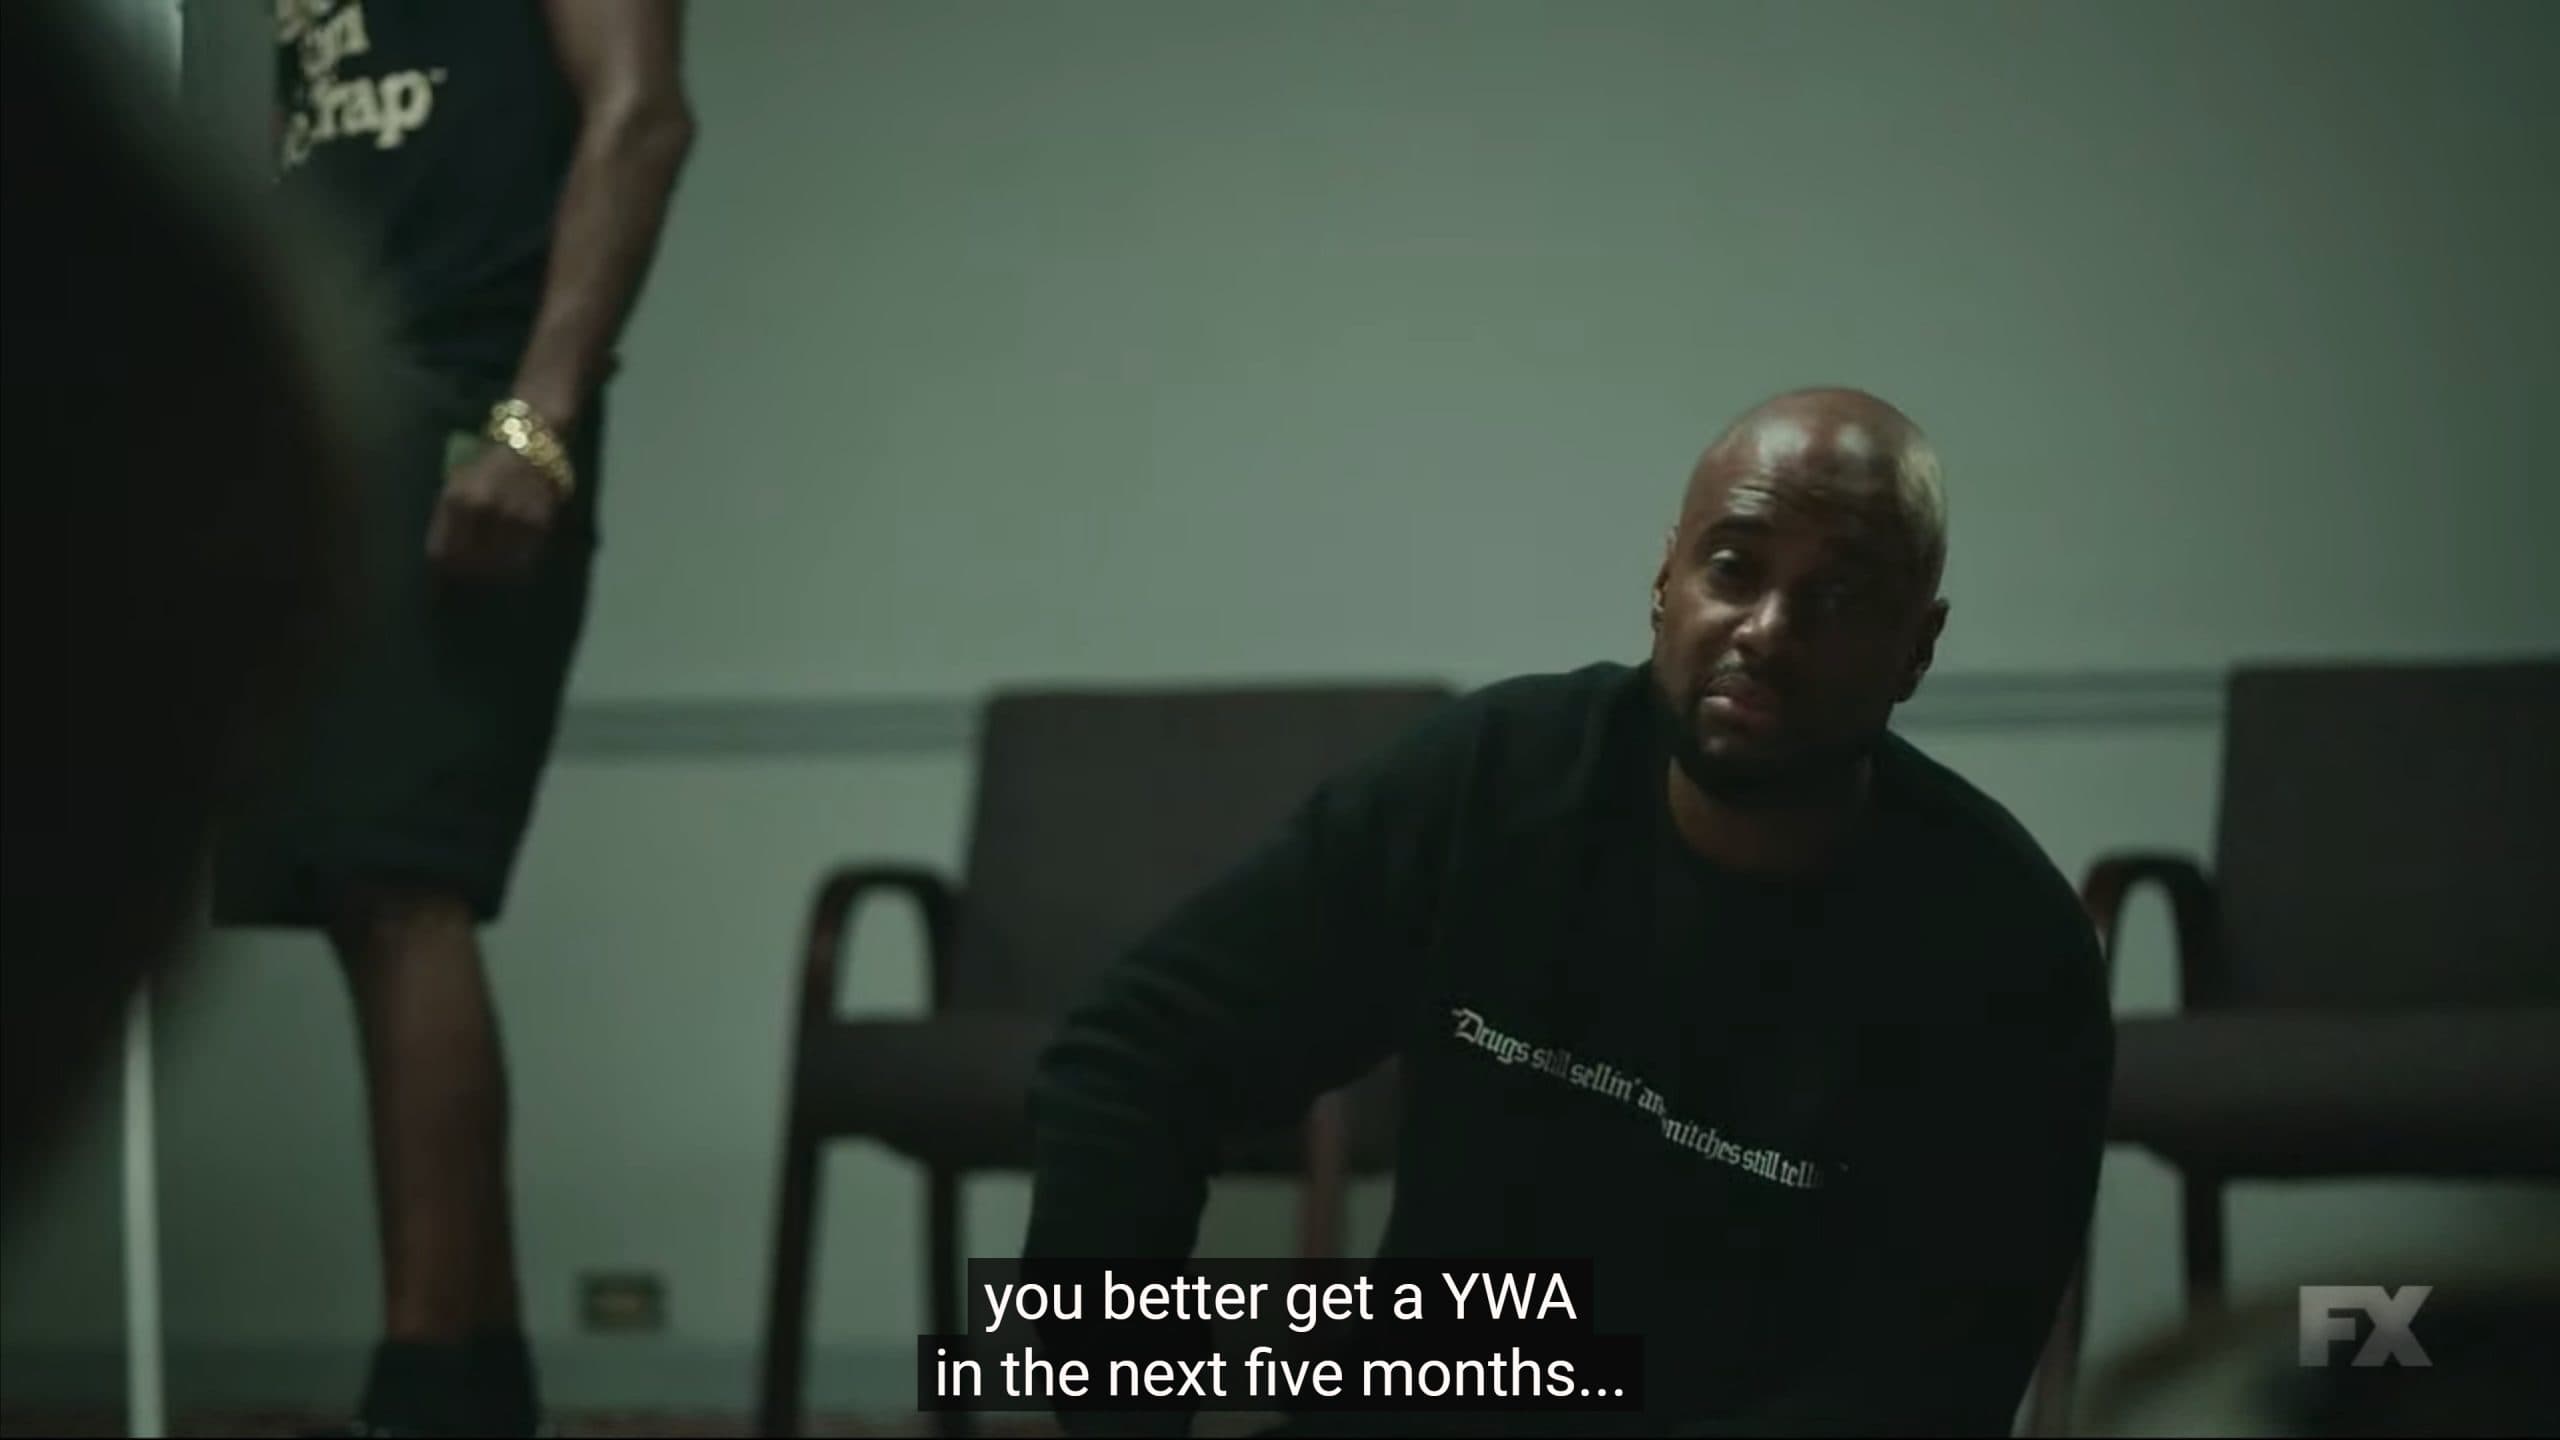 Buck (Charles Malik Whitfield) advising rappers in the room to invest in a YWA